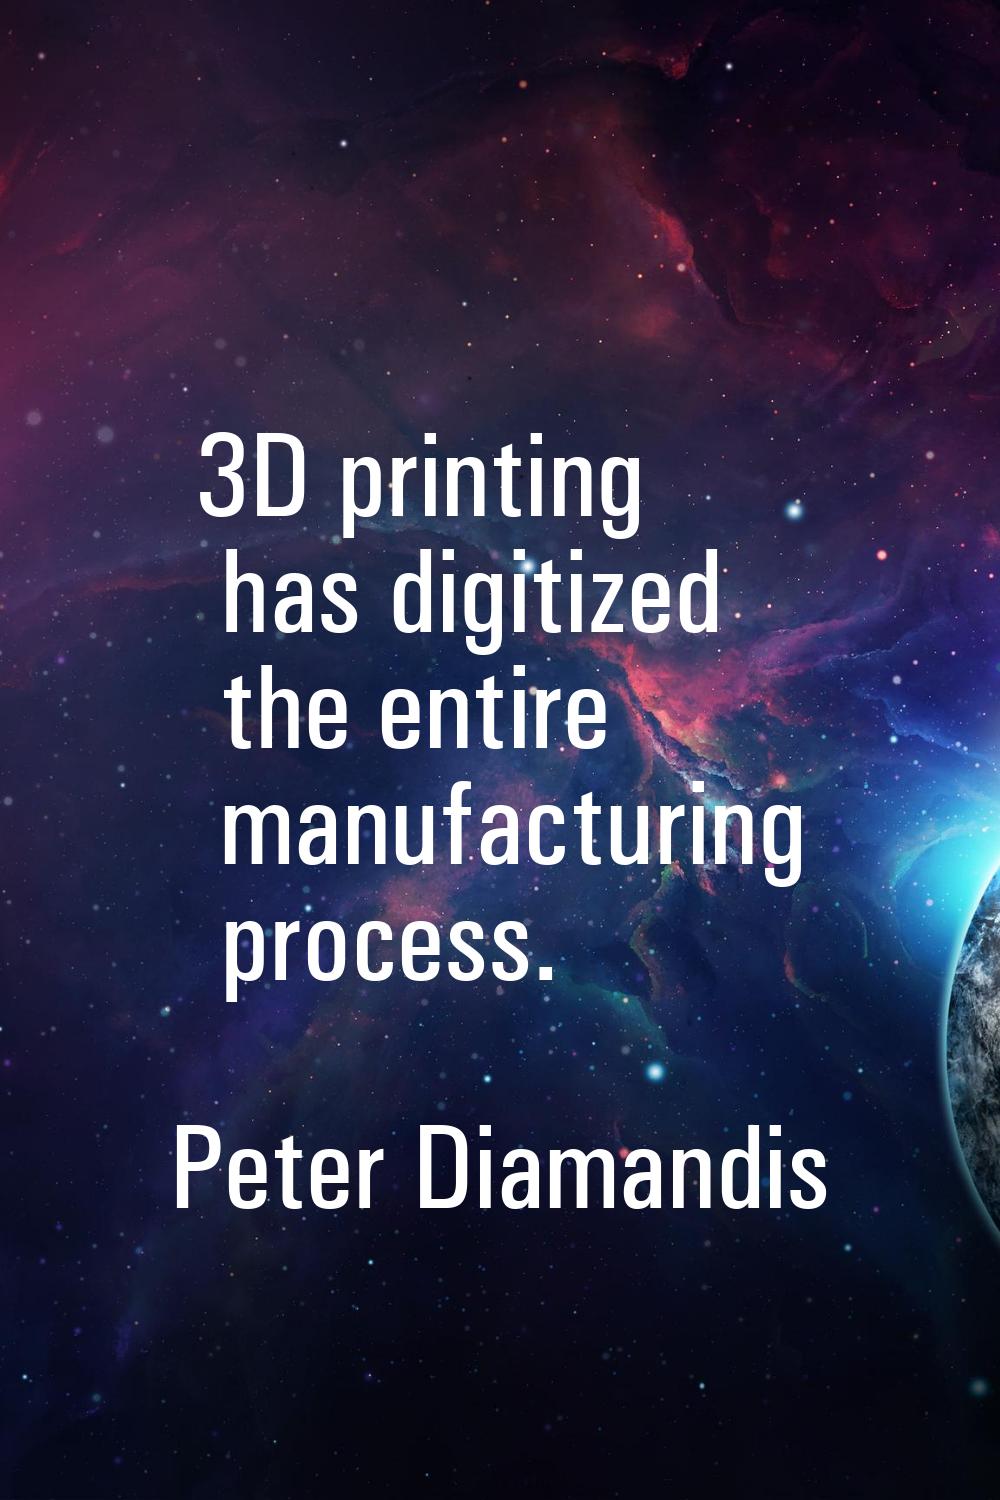 3D printing has digitized the entire manufacturing process.